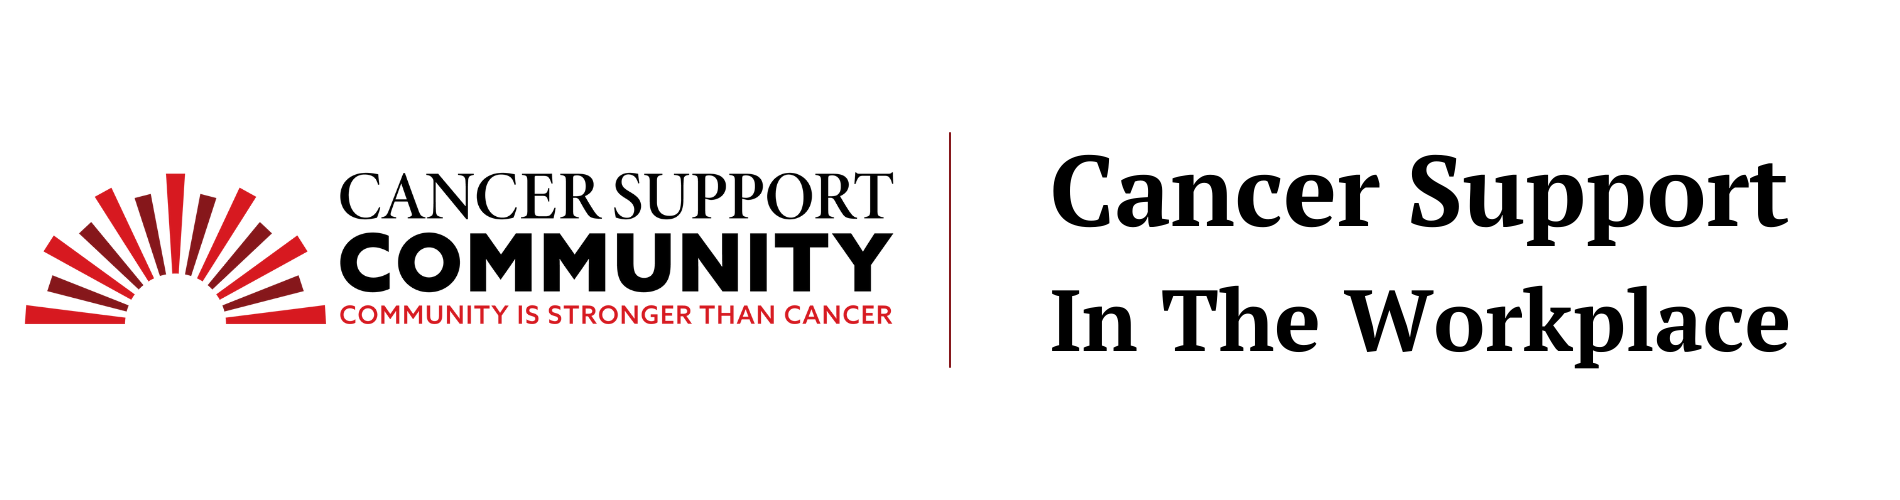 Cancer Support In The Workplace